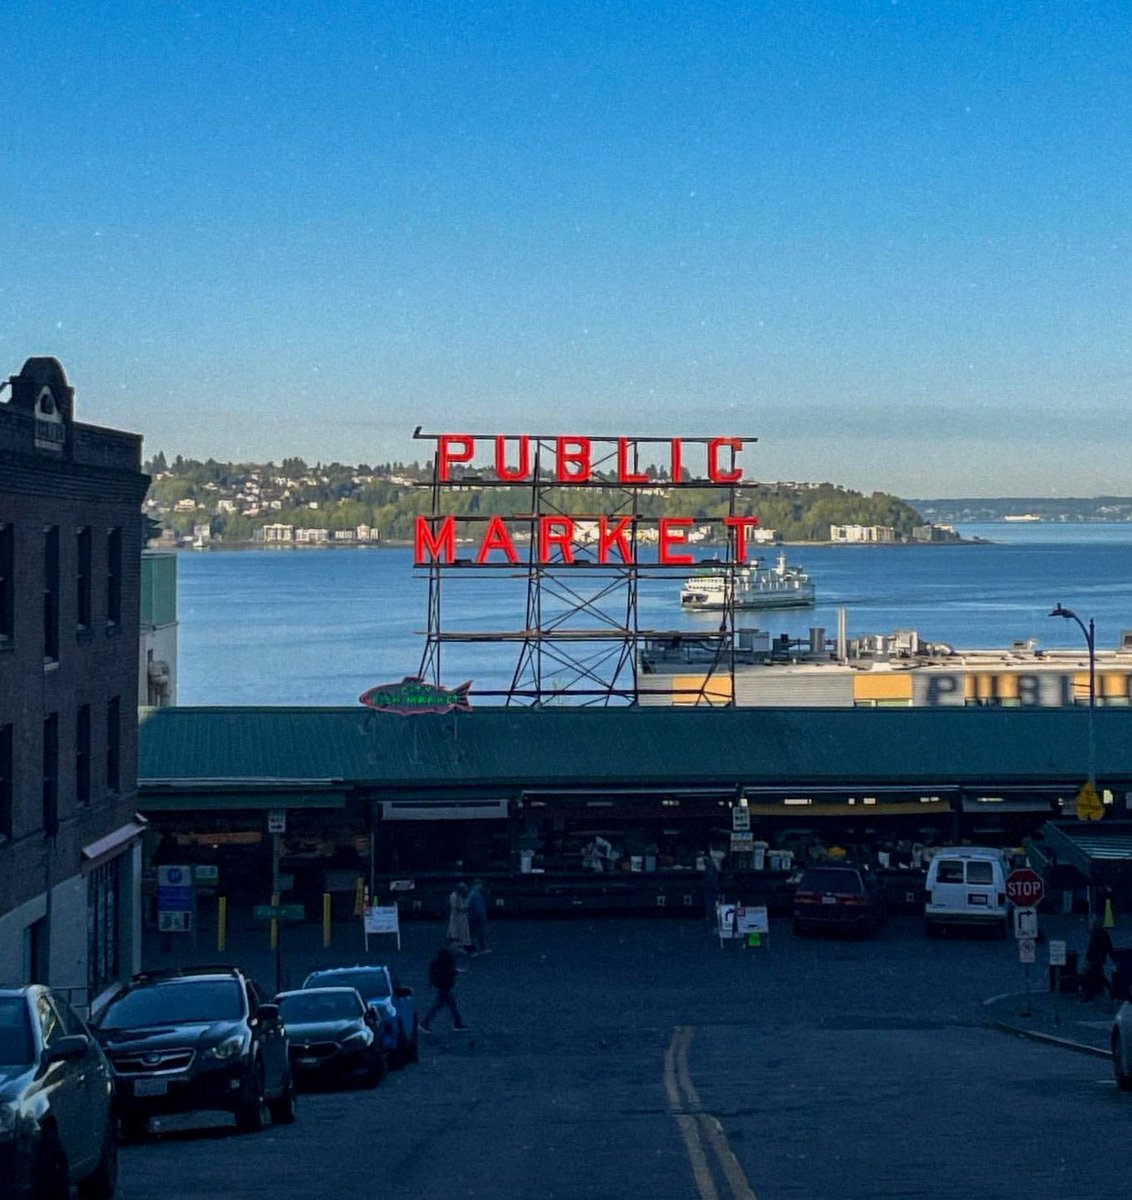 Today kicks off National Small Business Week! #PikePlaceMarket is a collection of 500 small businesses and entrepreneurs pursuing their dreams. 

Learn more about all the businesses that call the Market home 👉 pikeplacemarket.org/about-pike-pla…

📸: buffet_girl 

#smallbusinesssupport